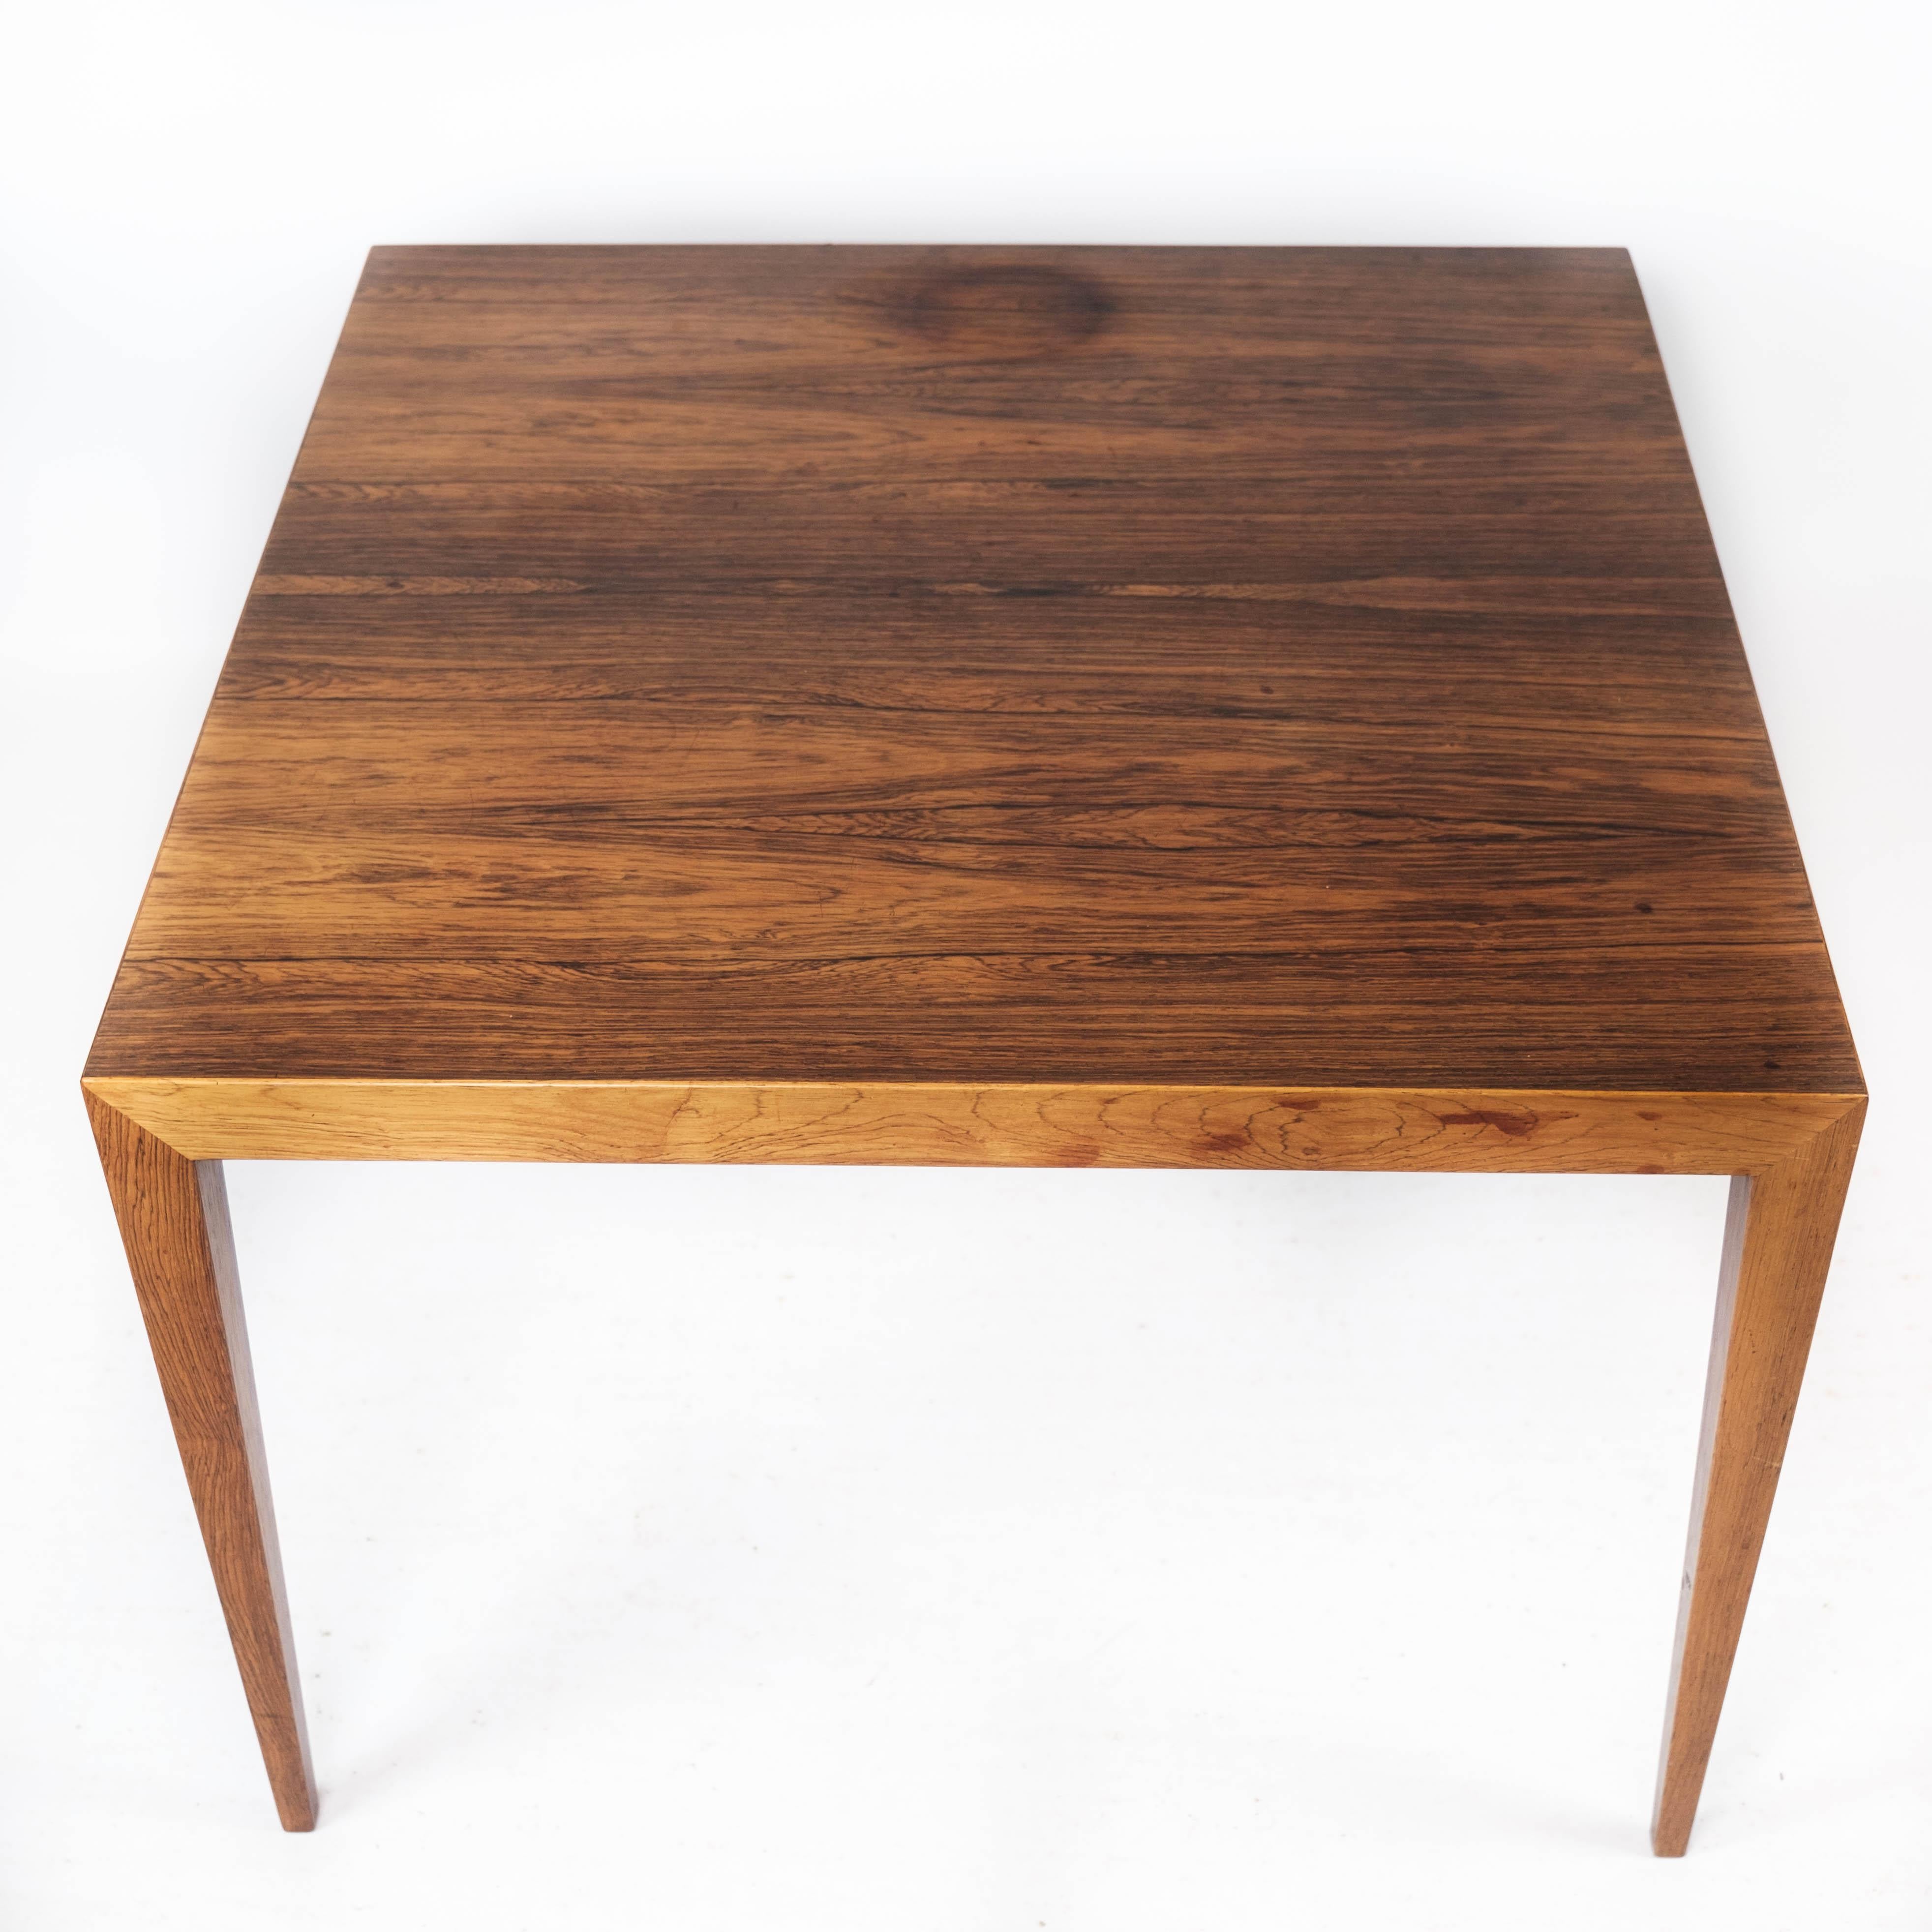 Coffee table in rosewood designed by Severin Hansen for Haslev Furniture in the 1960s. The table is in great vintage condition.